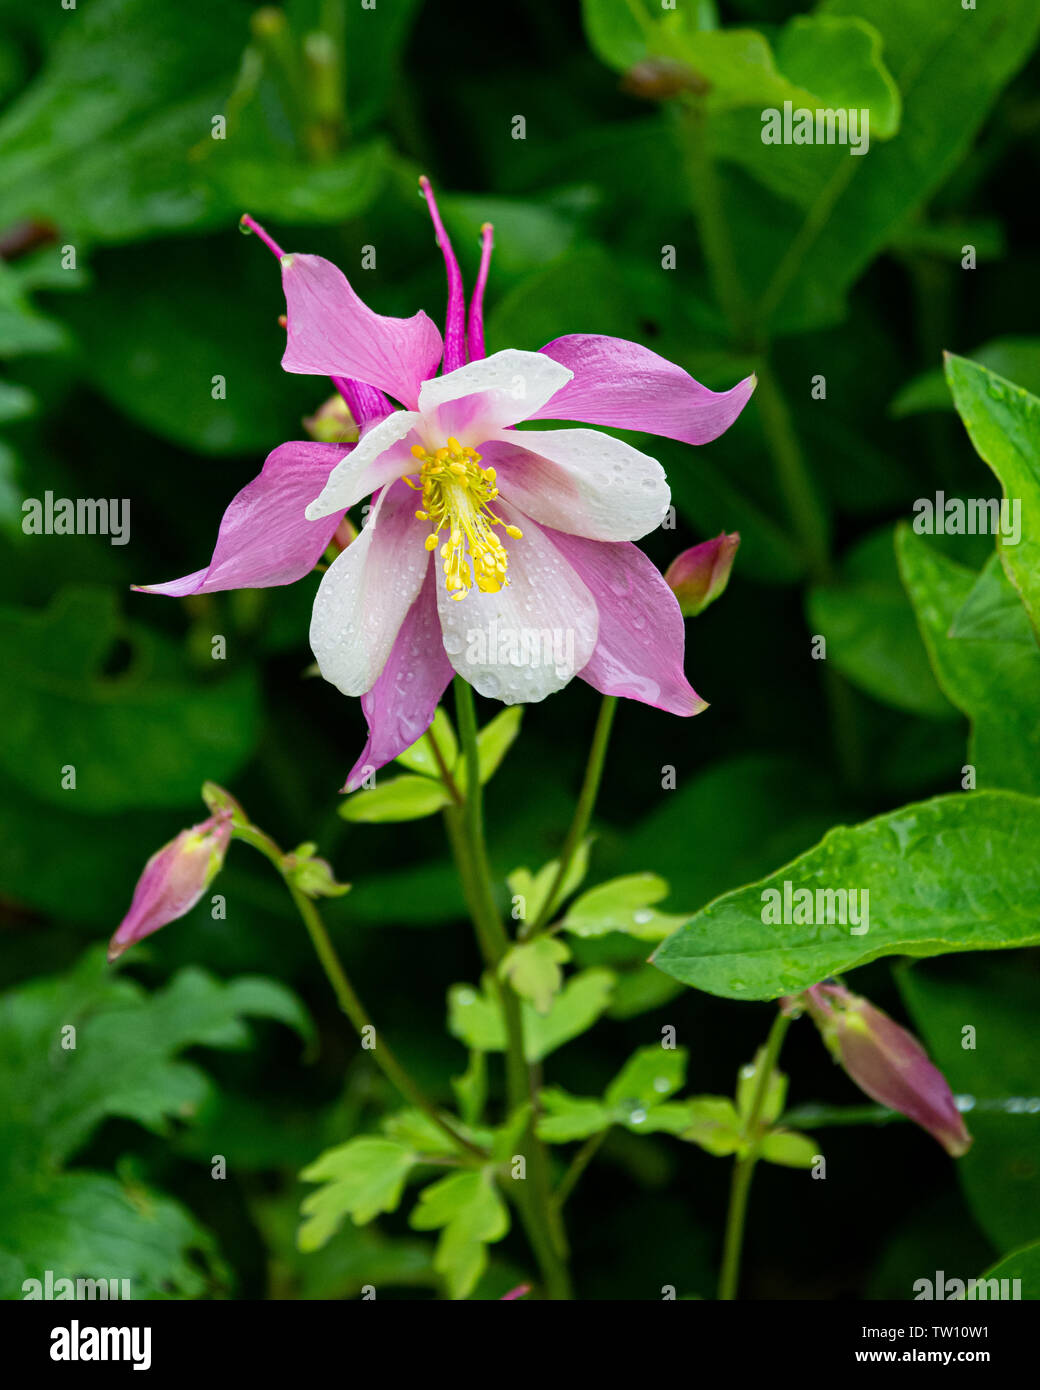 A bright colorful pink and white Columbine flower, Aquilegia, growing in the garden. Stock Photo